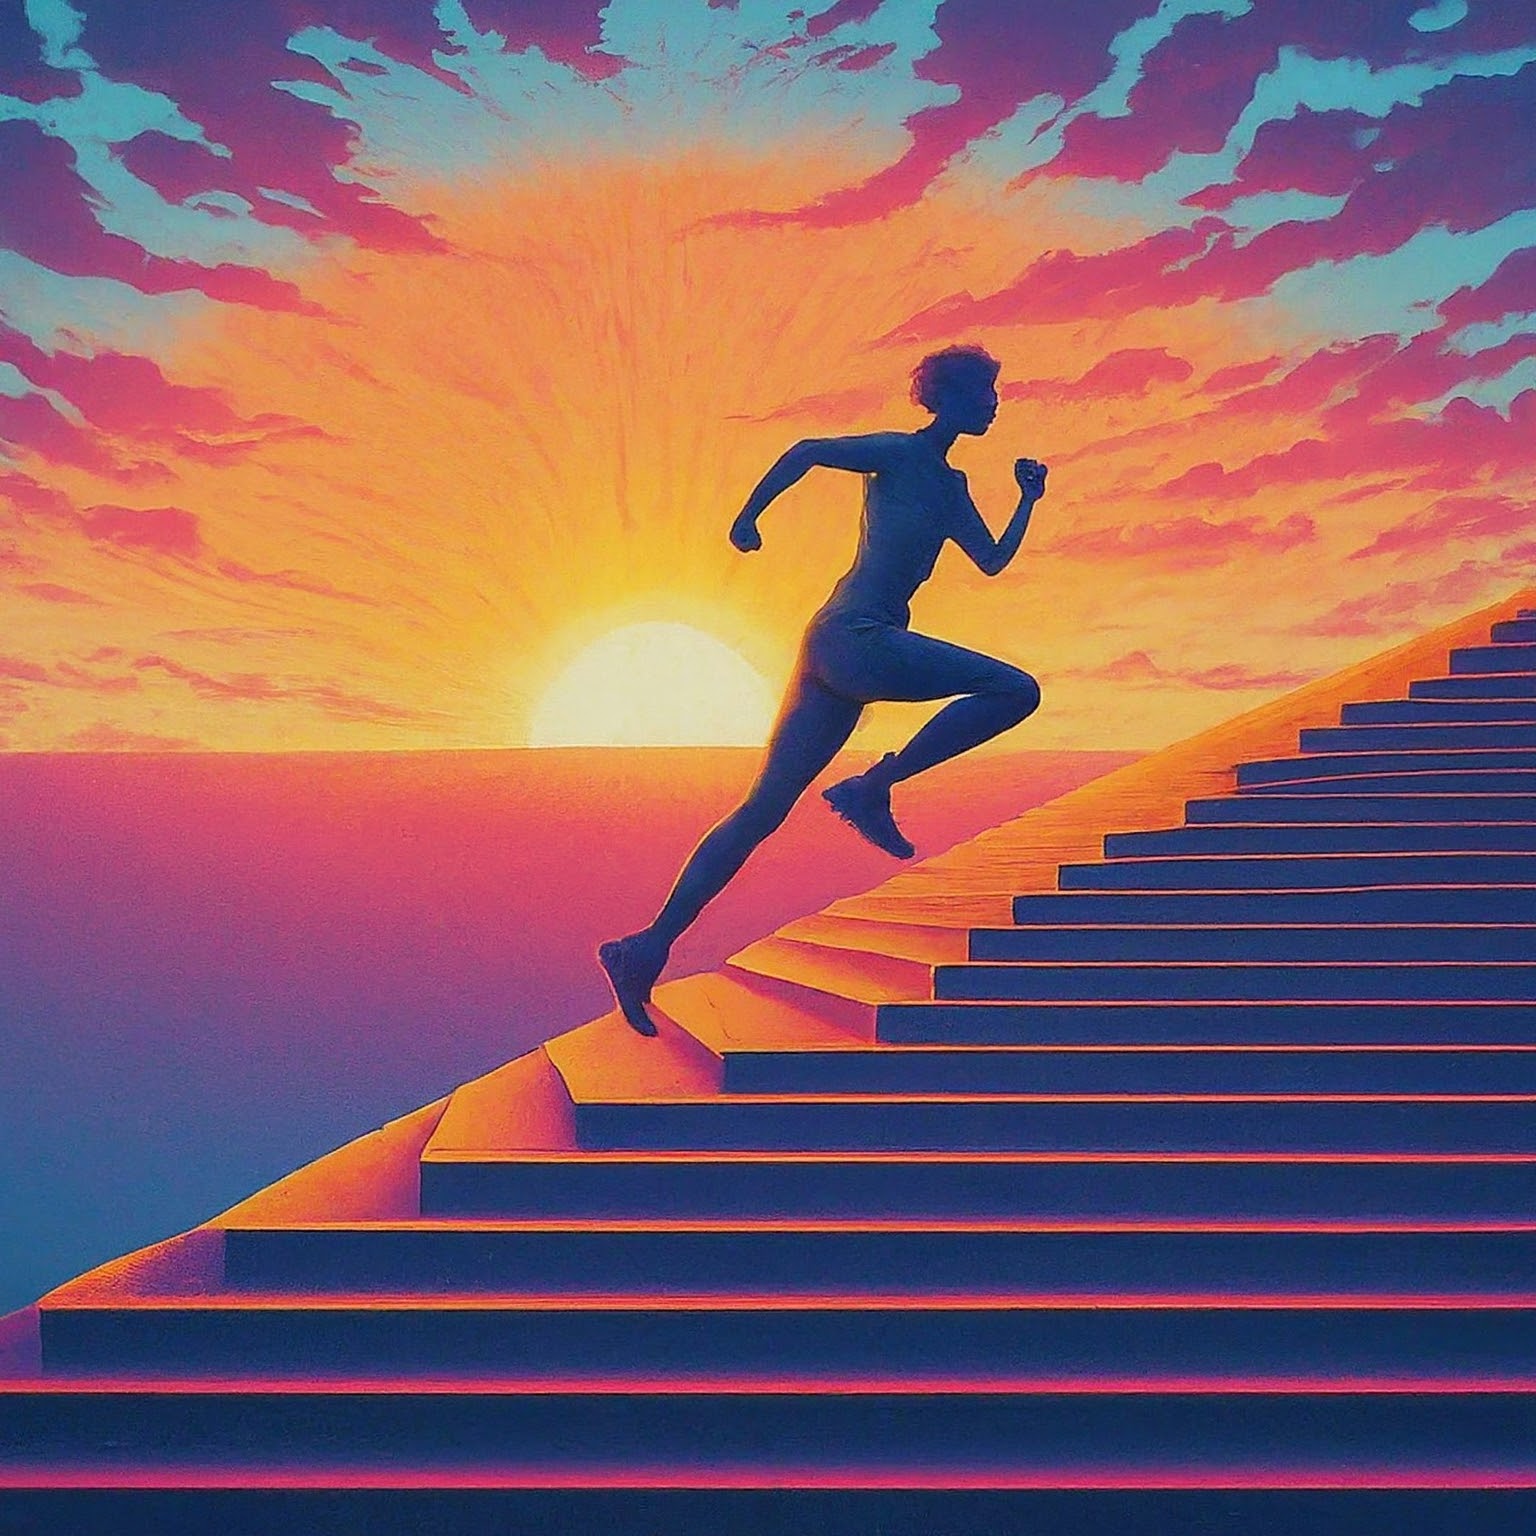 Motivational Thursday - Runner running up stairs to her goal - humagineers